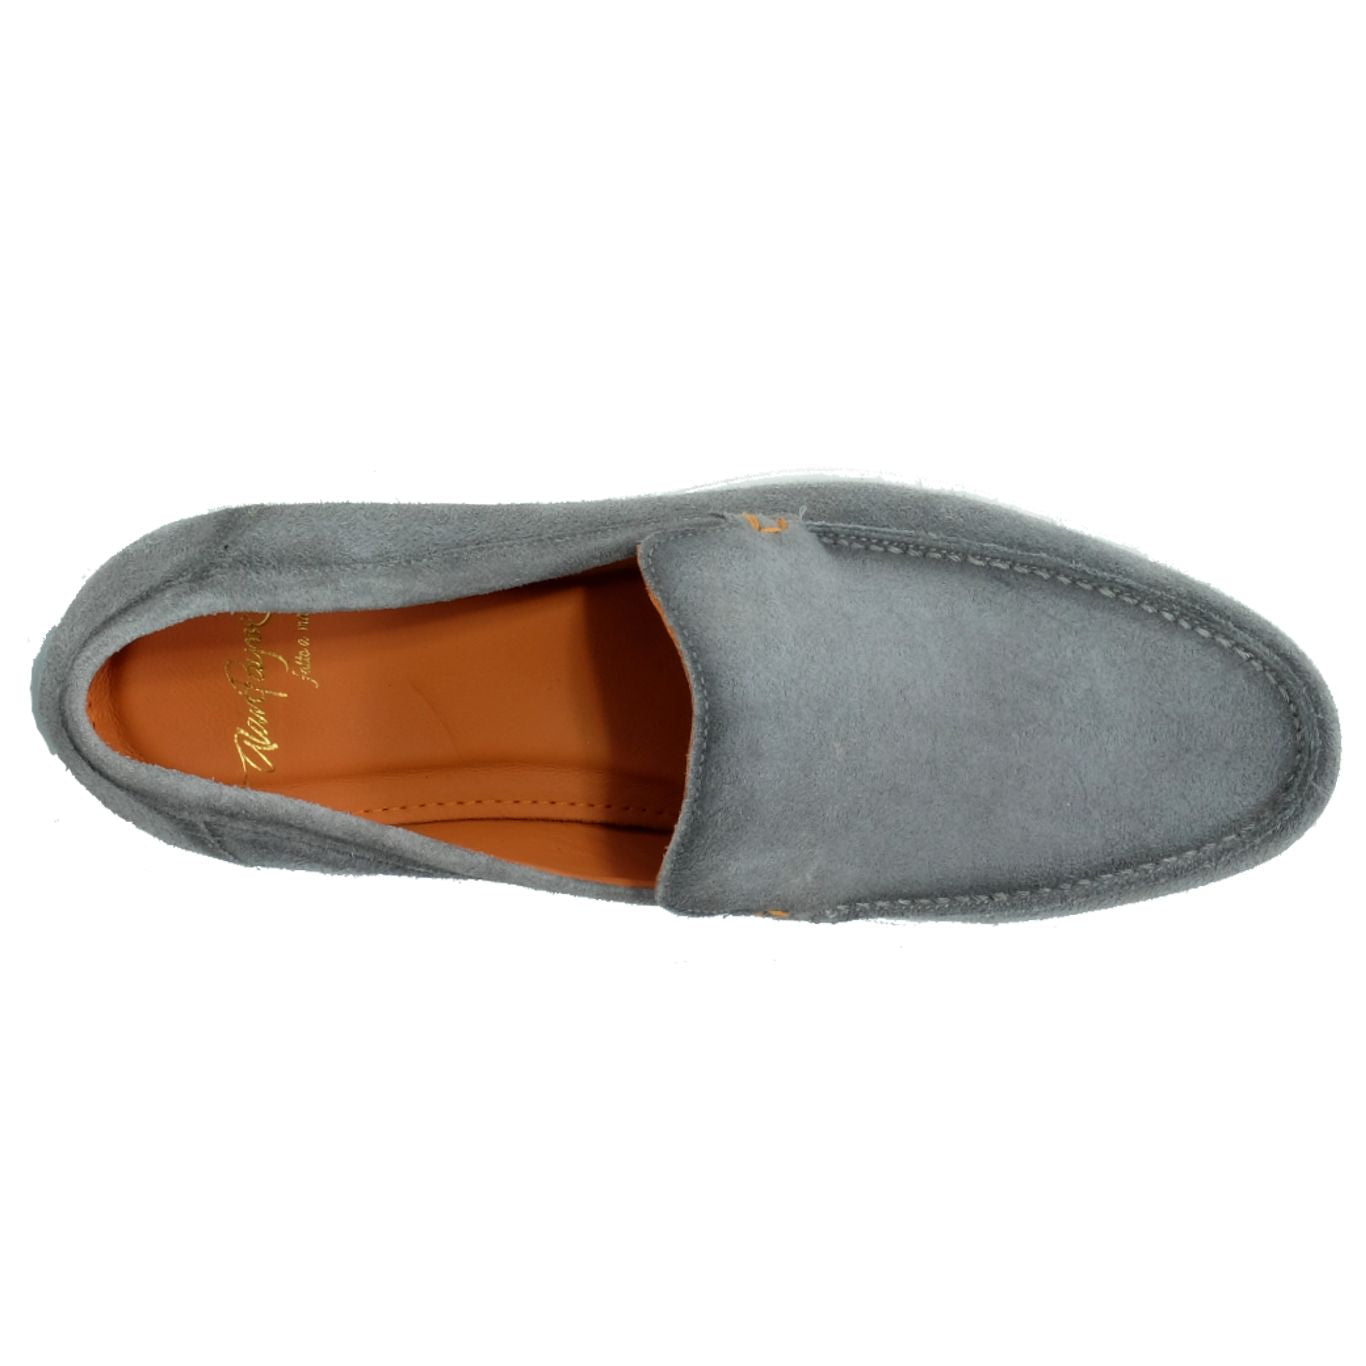 Rio Casual Suede Loafer in Pewter by Alan Payne Footwear